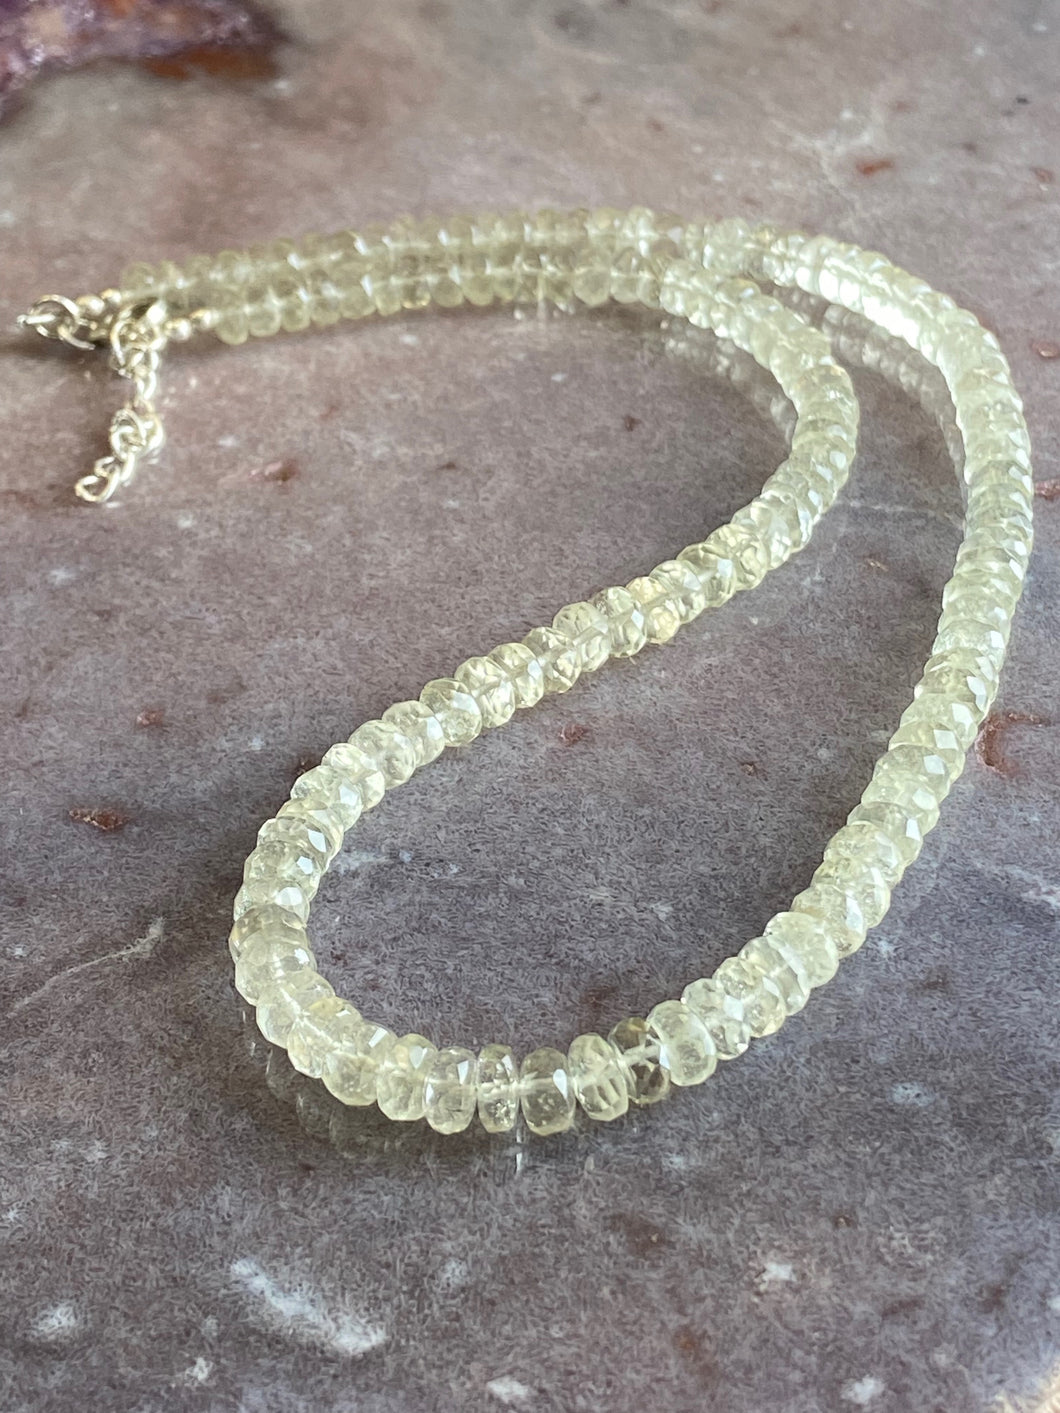 Libyan desert glass necklace 4 faceted